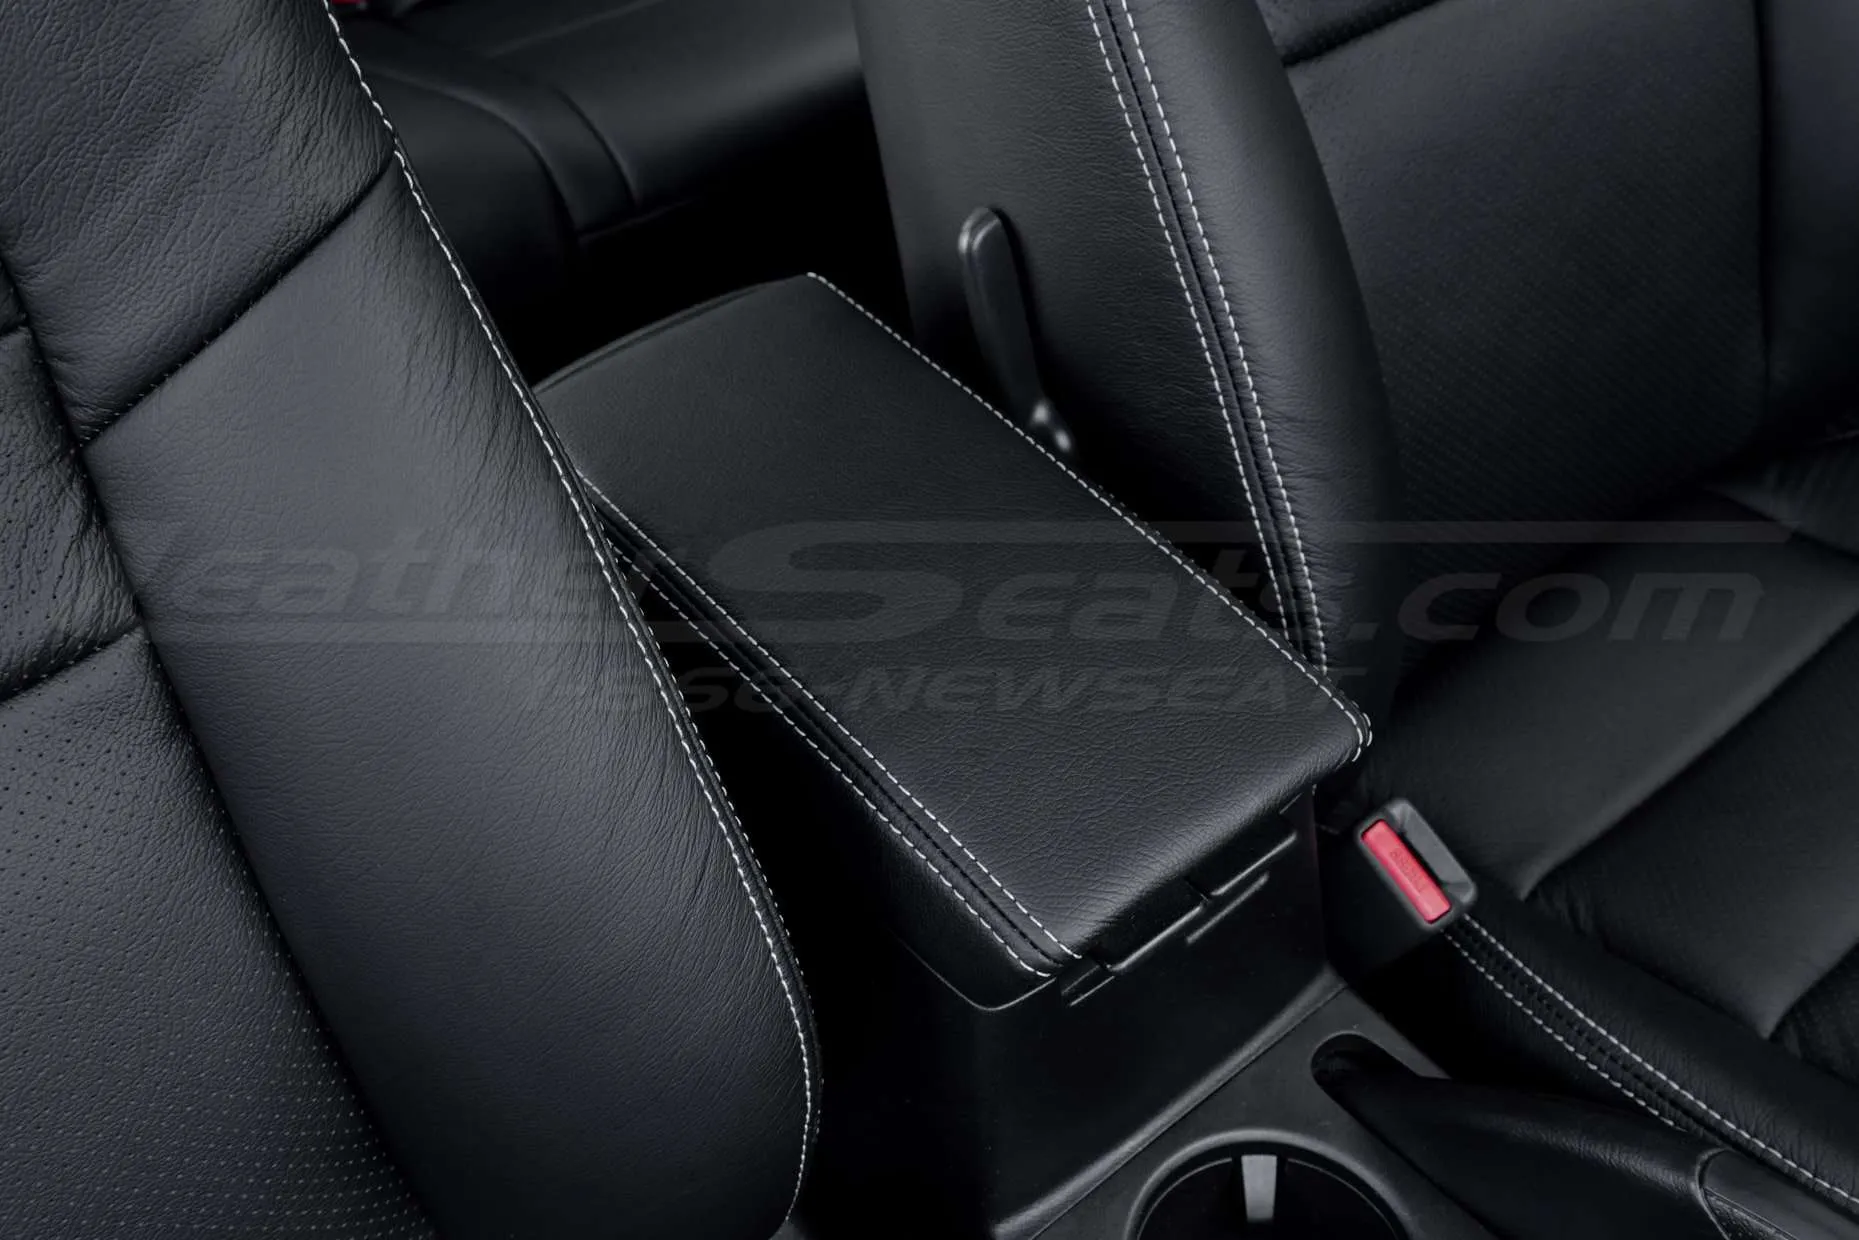 Honda Accord leather console lid close-up